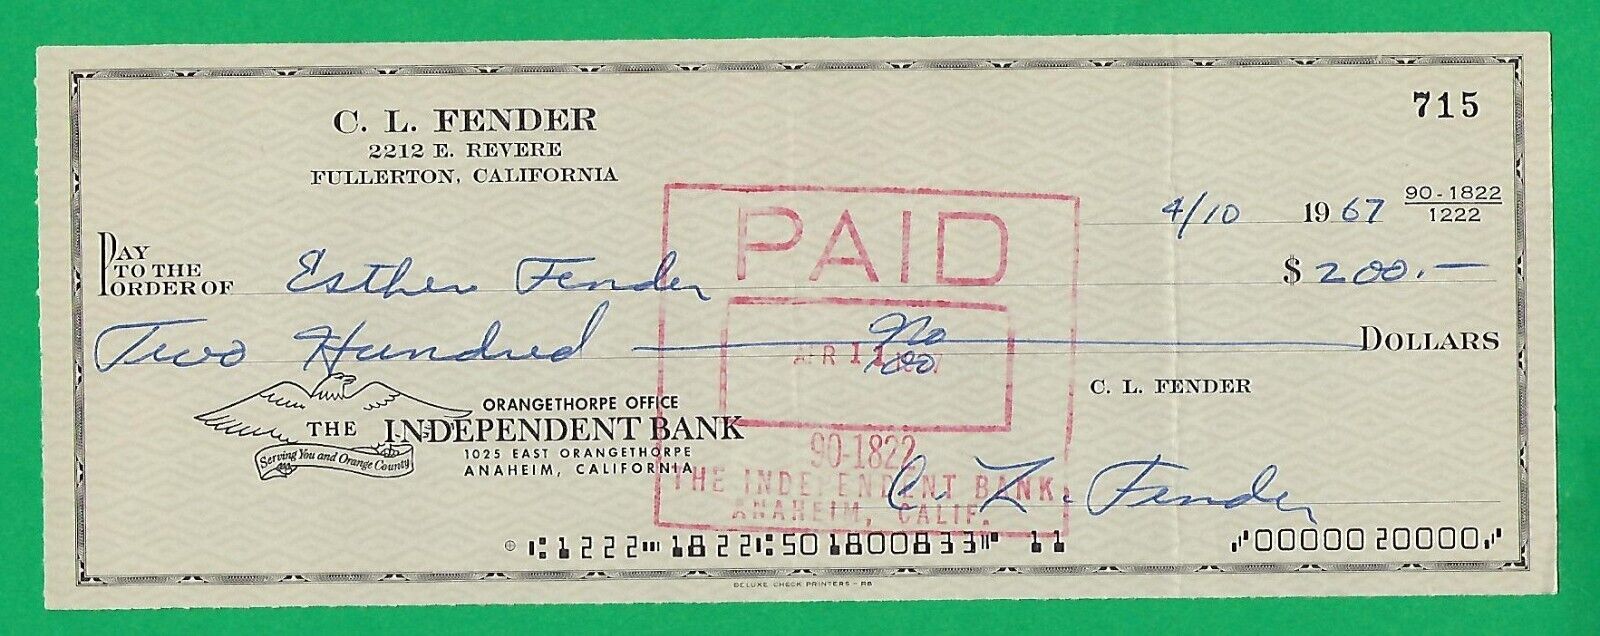 Leo Fender 1967 Signed Cancelled Business Check Made To Wife Esther Fender